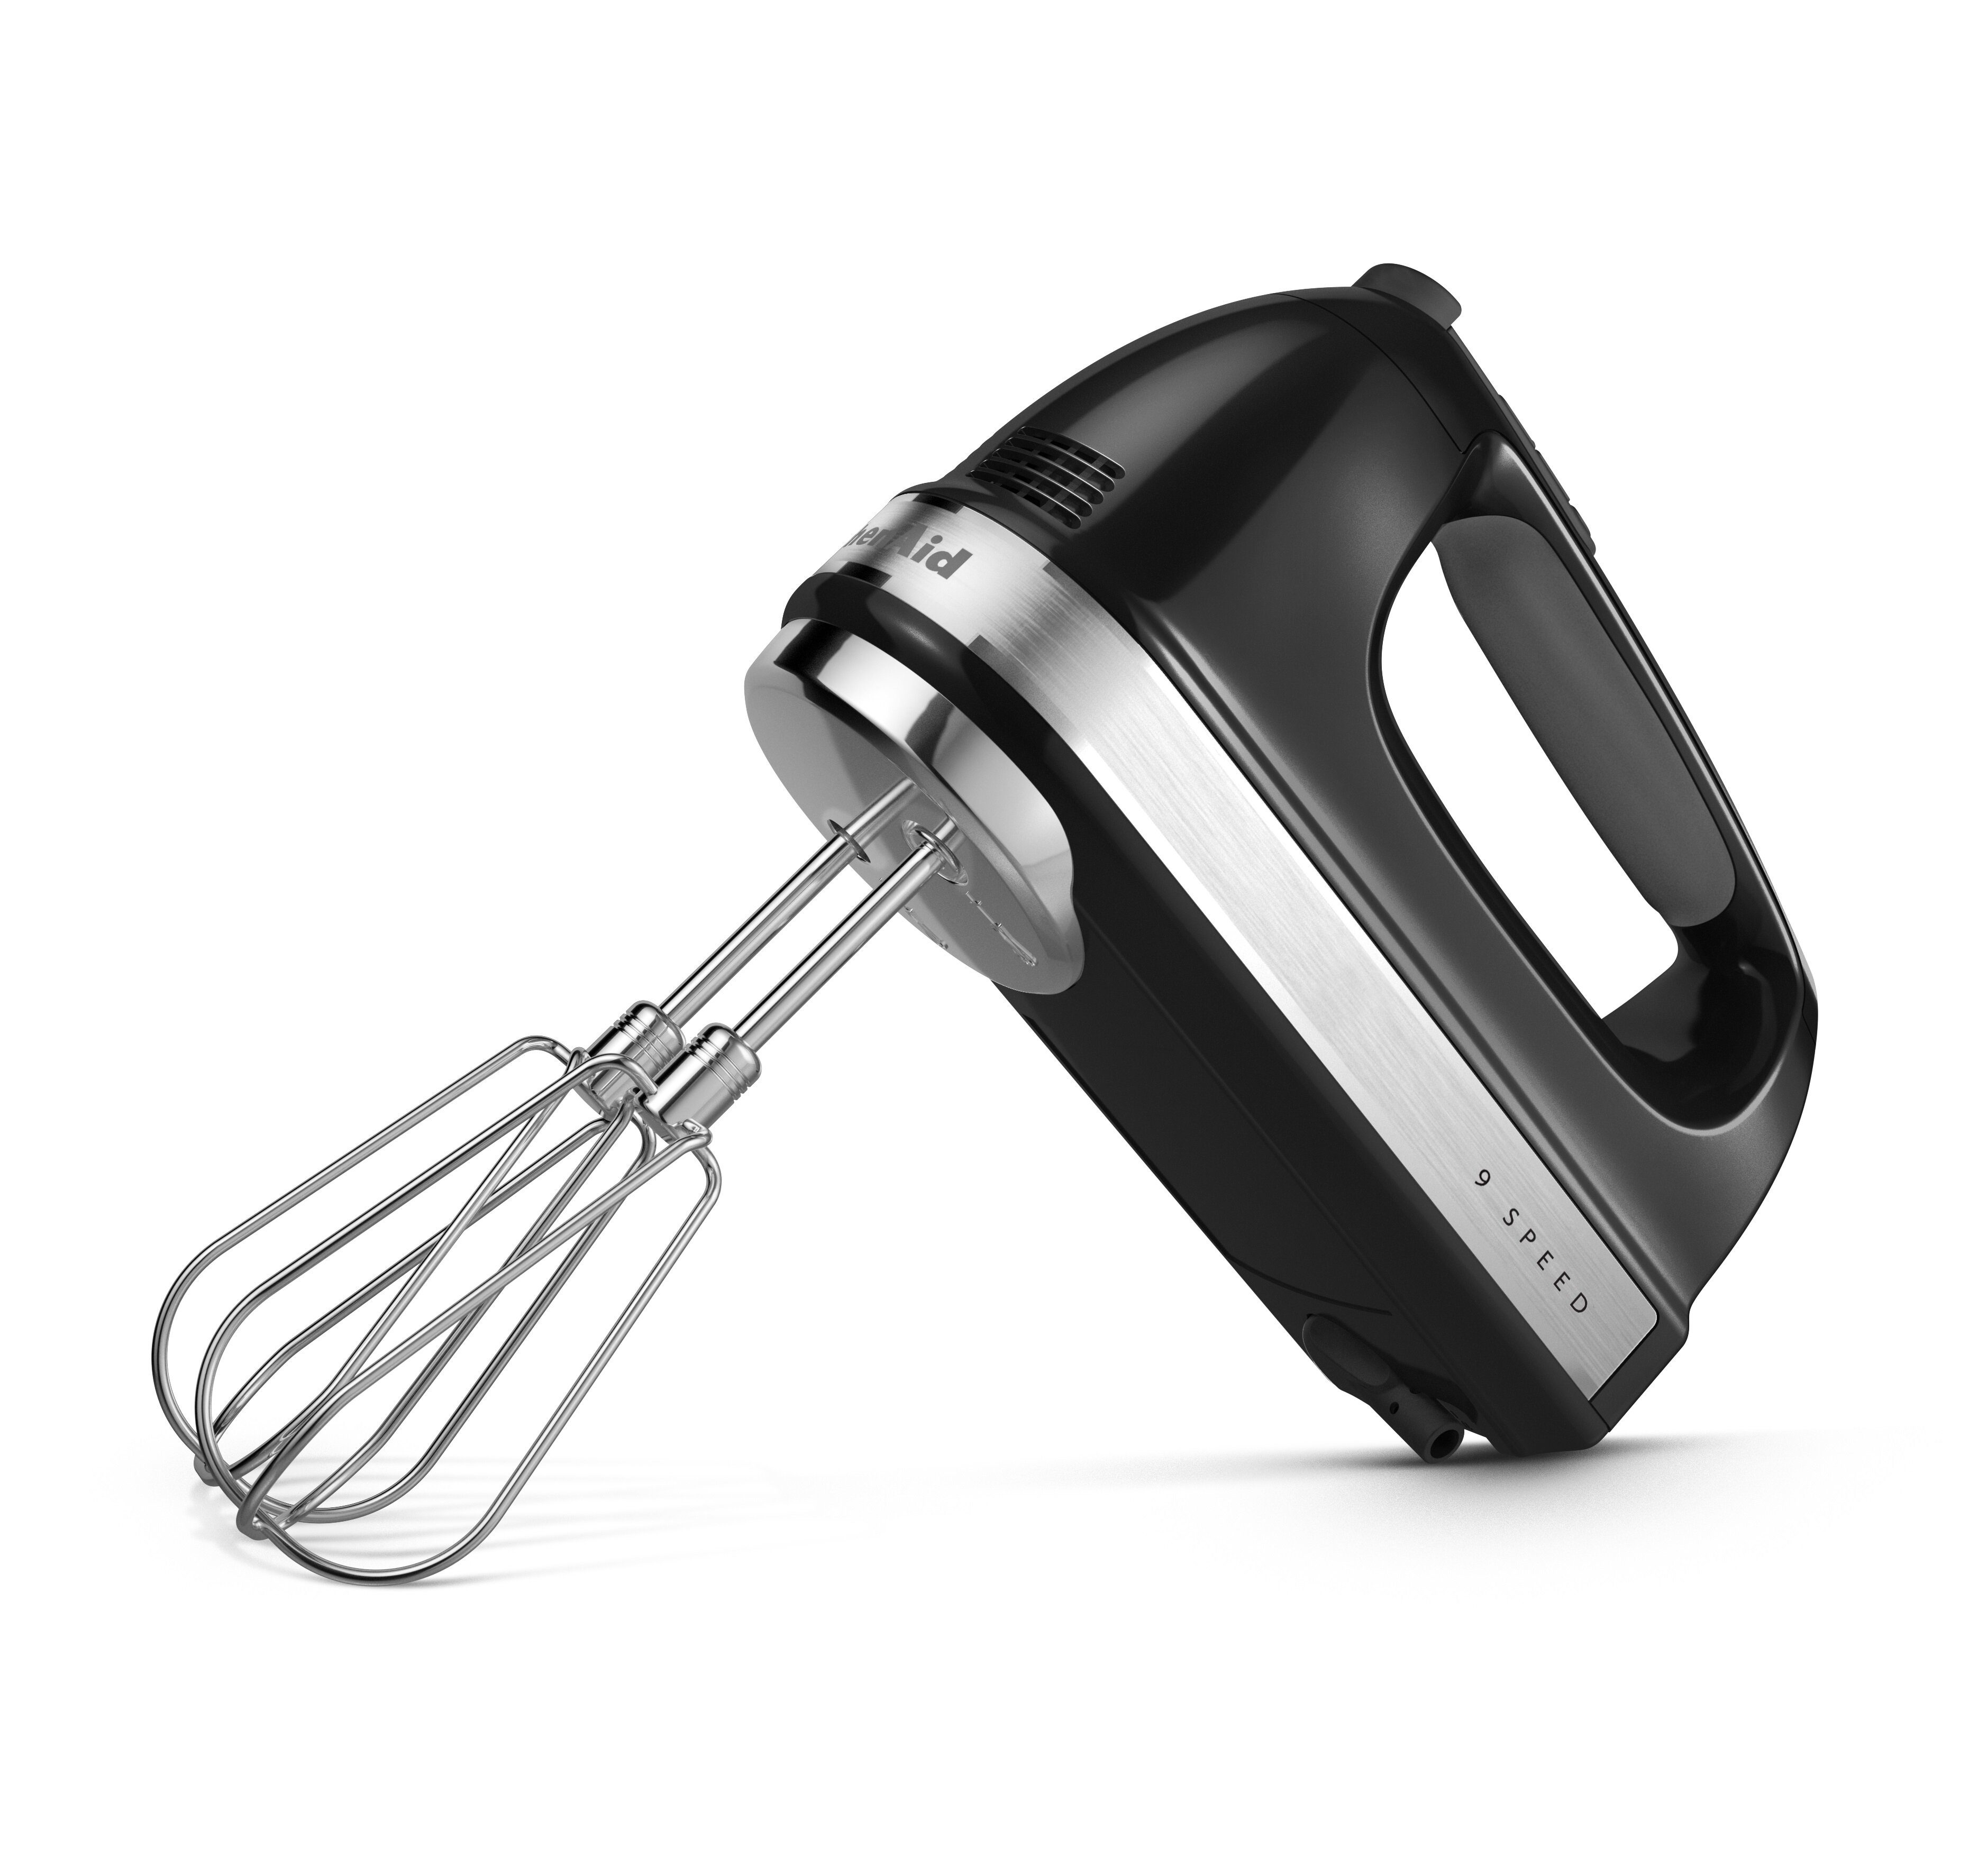 KitchenAid KHM926WH White 9 Speed Hand Mixer with Stainless Steel Turbo  Beaters, Pro Whisk, Dough Hooks, and Blending Rod - 120V